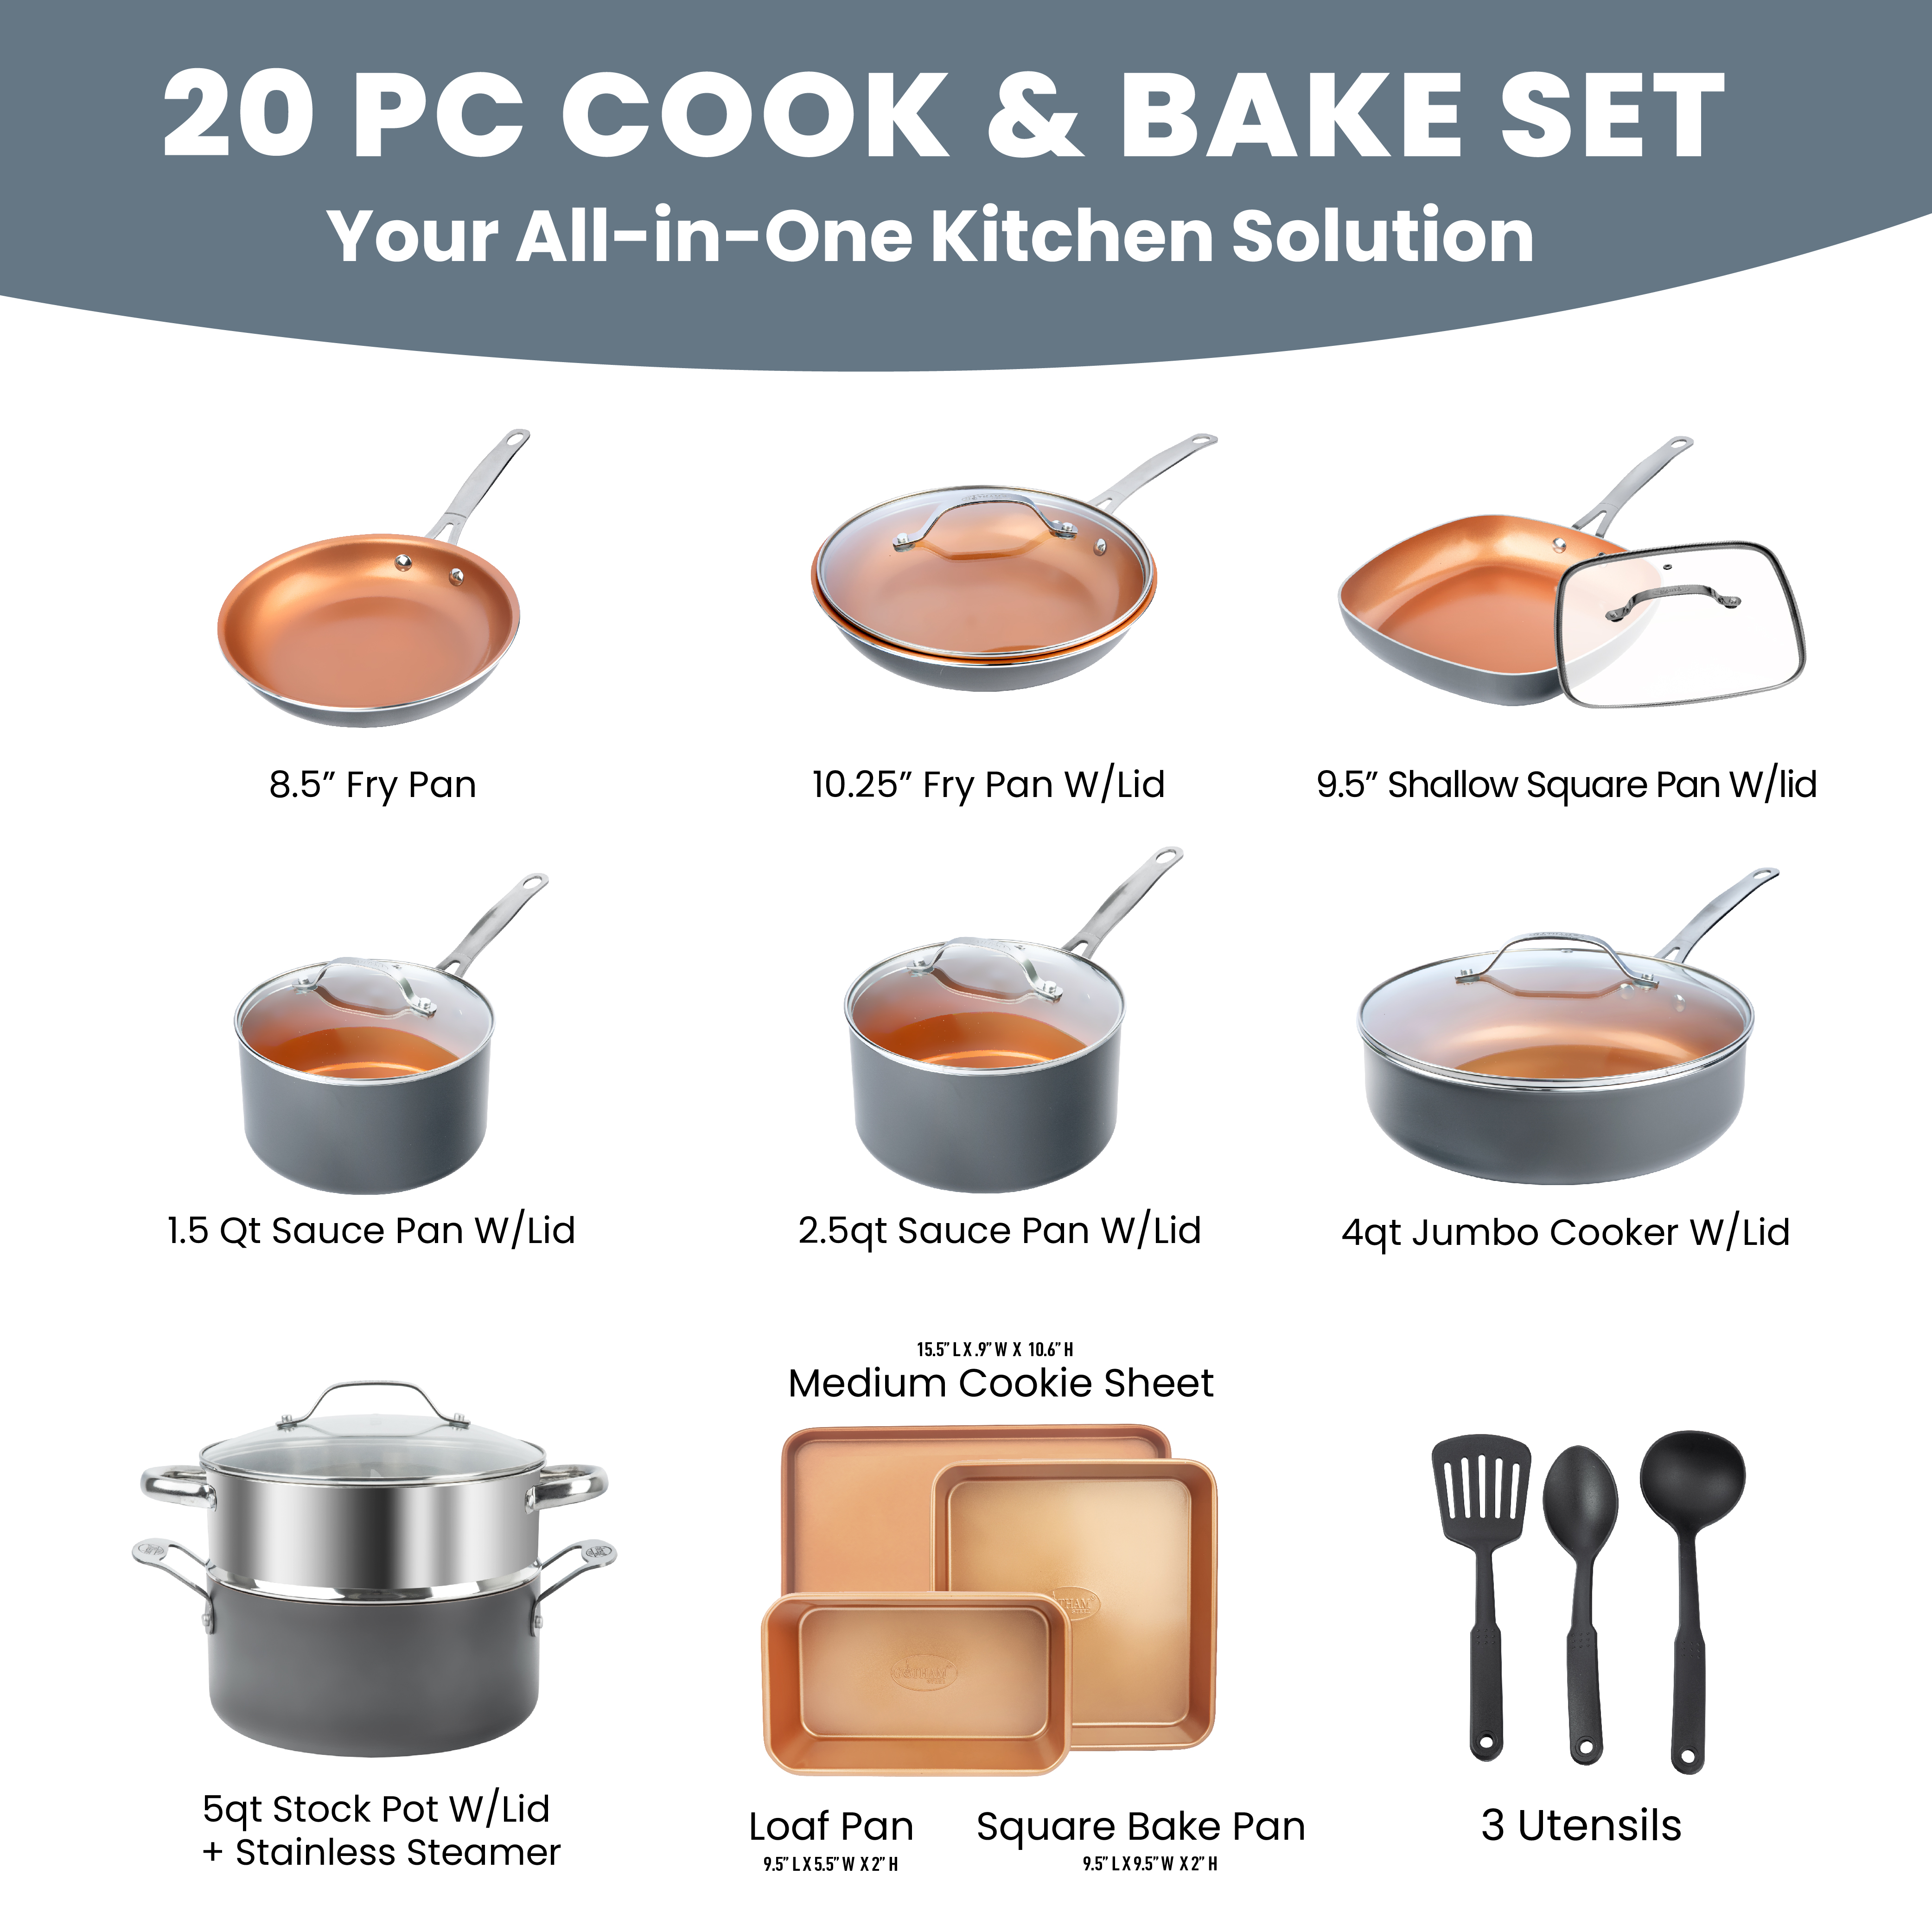 Gotham Steel Pots and Pans Set 20 Piece Cookware Set with Nonstick Ceramic Copper Coating - image 3 of 8